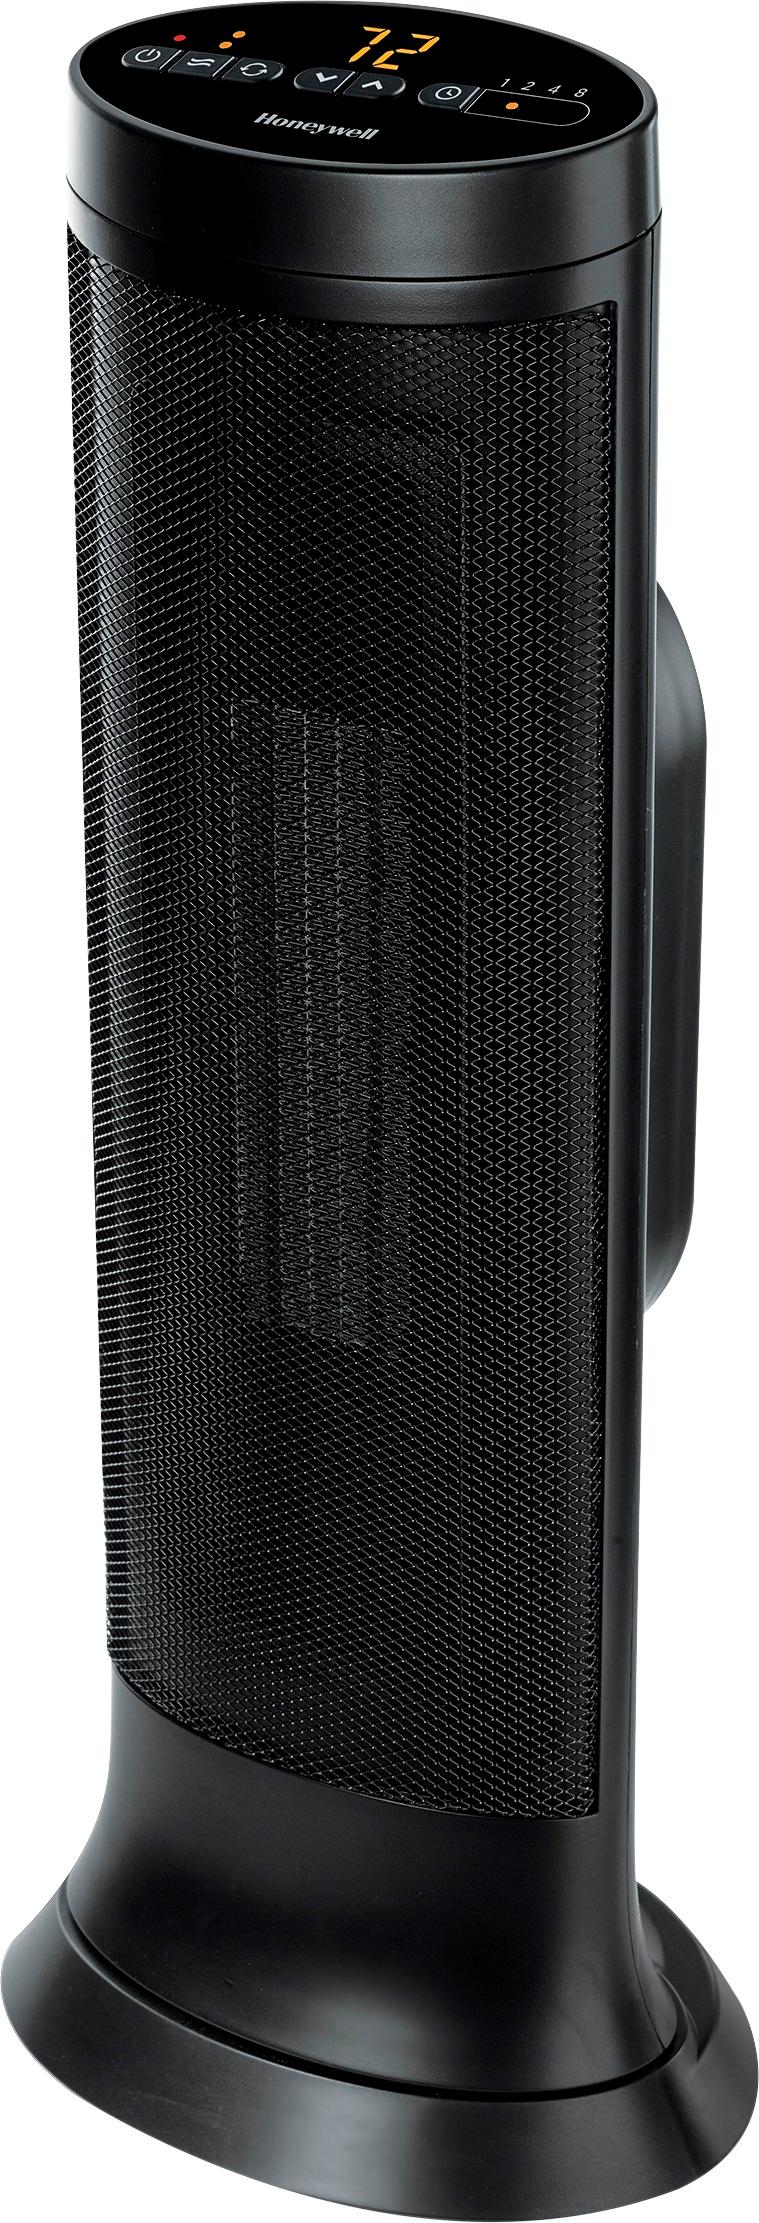 Questions and Answers: Honeywell Electric Heater Black HCE317B - Best Buy